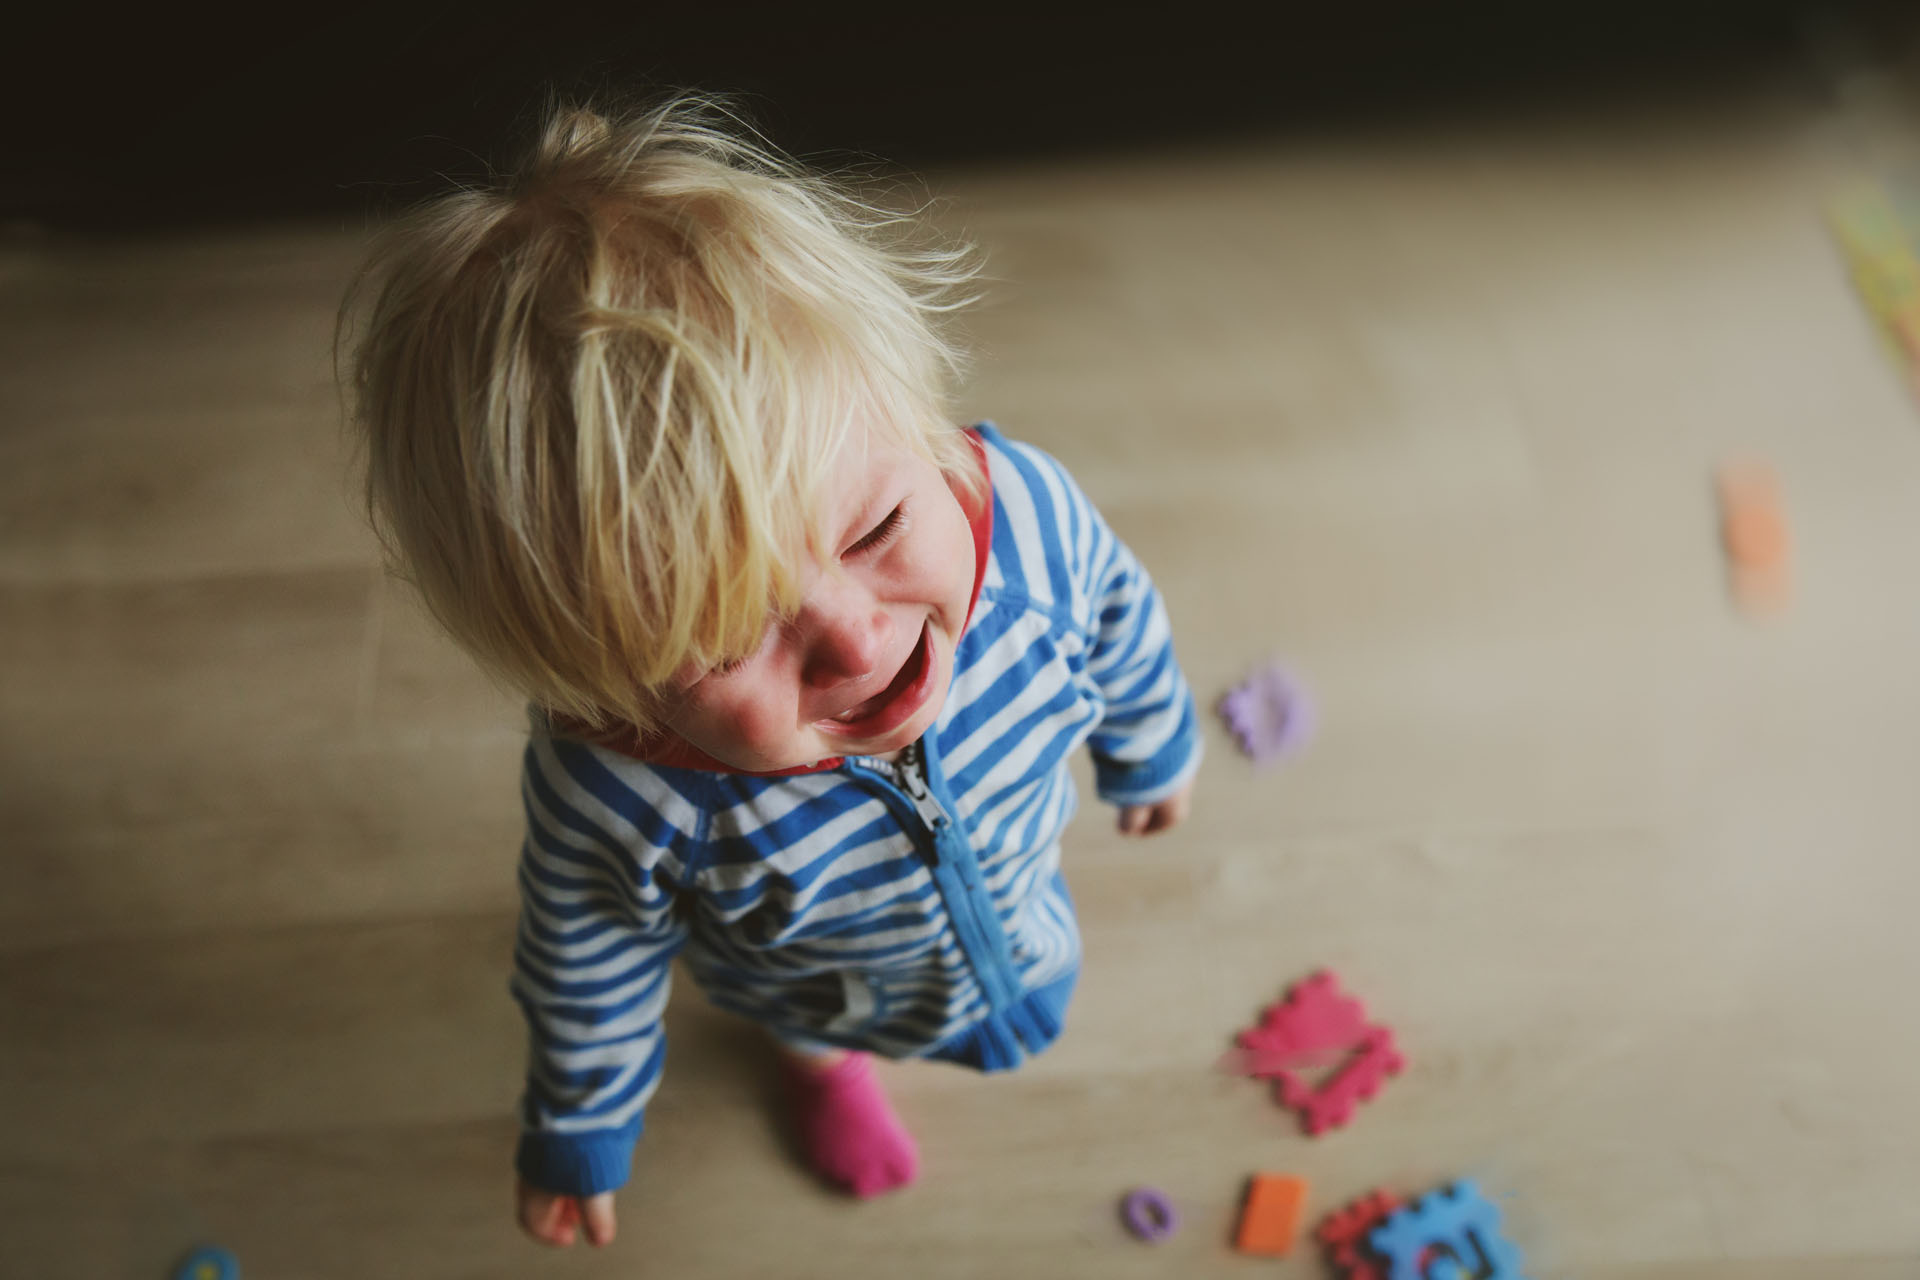 separation anxiety in toddlers at night